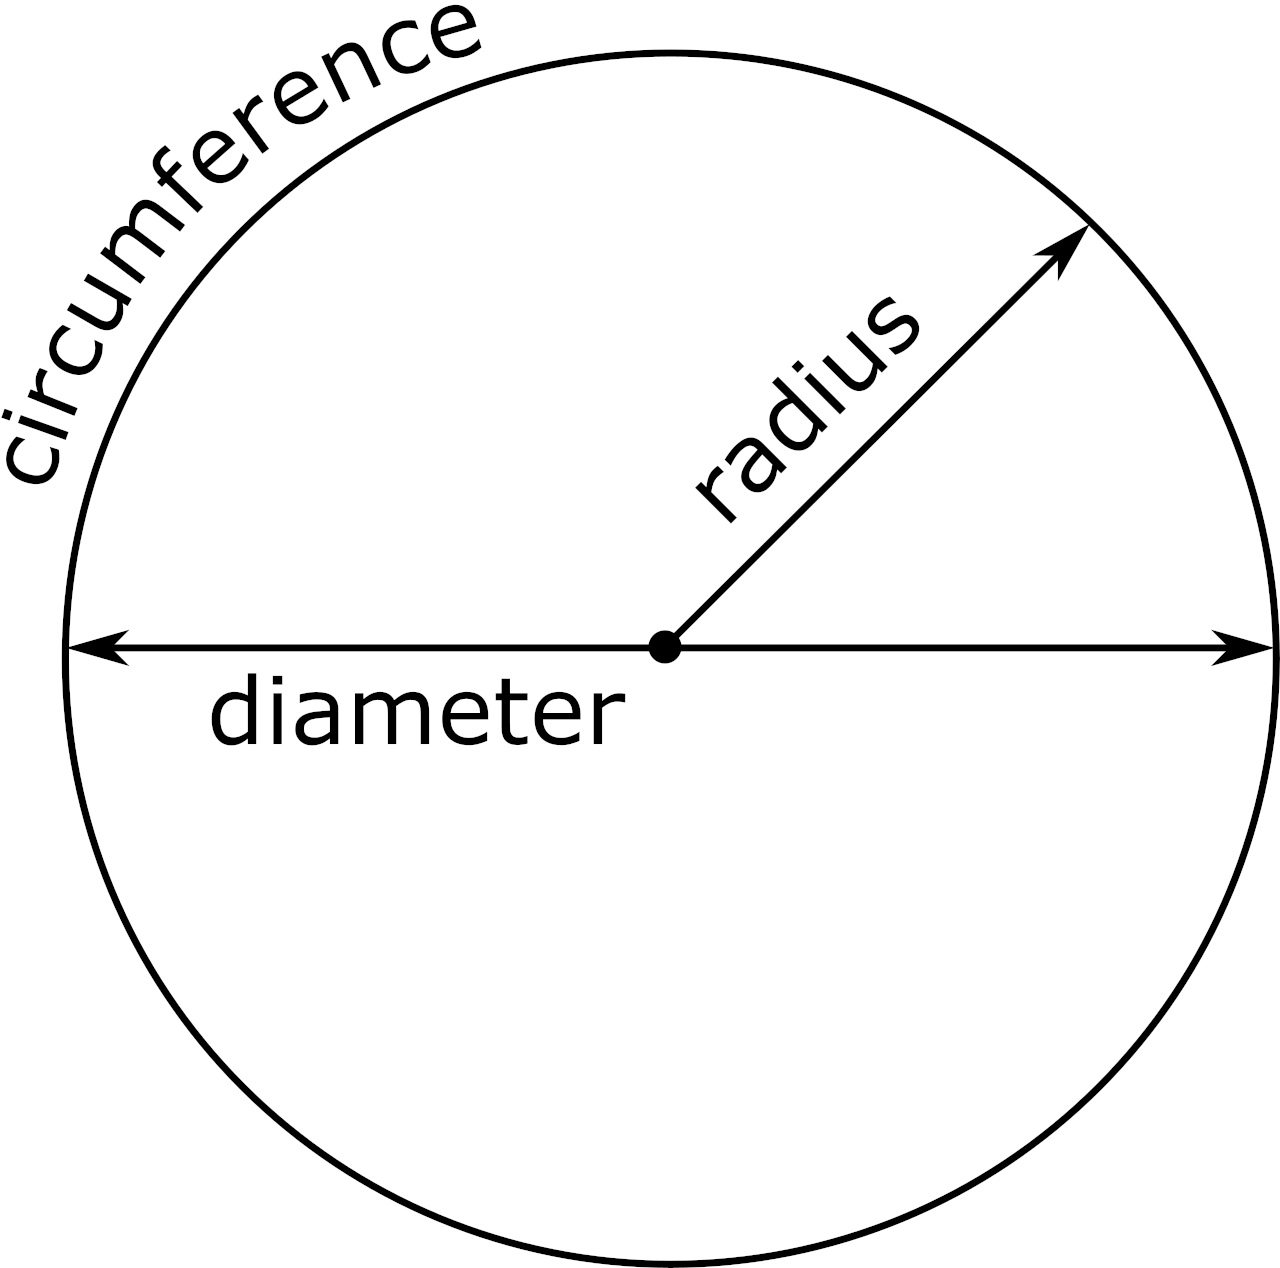 diagram of a circle showing the radius, diameter, and circumference